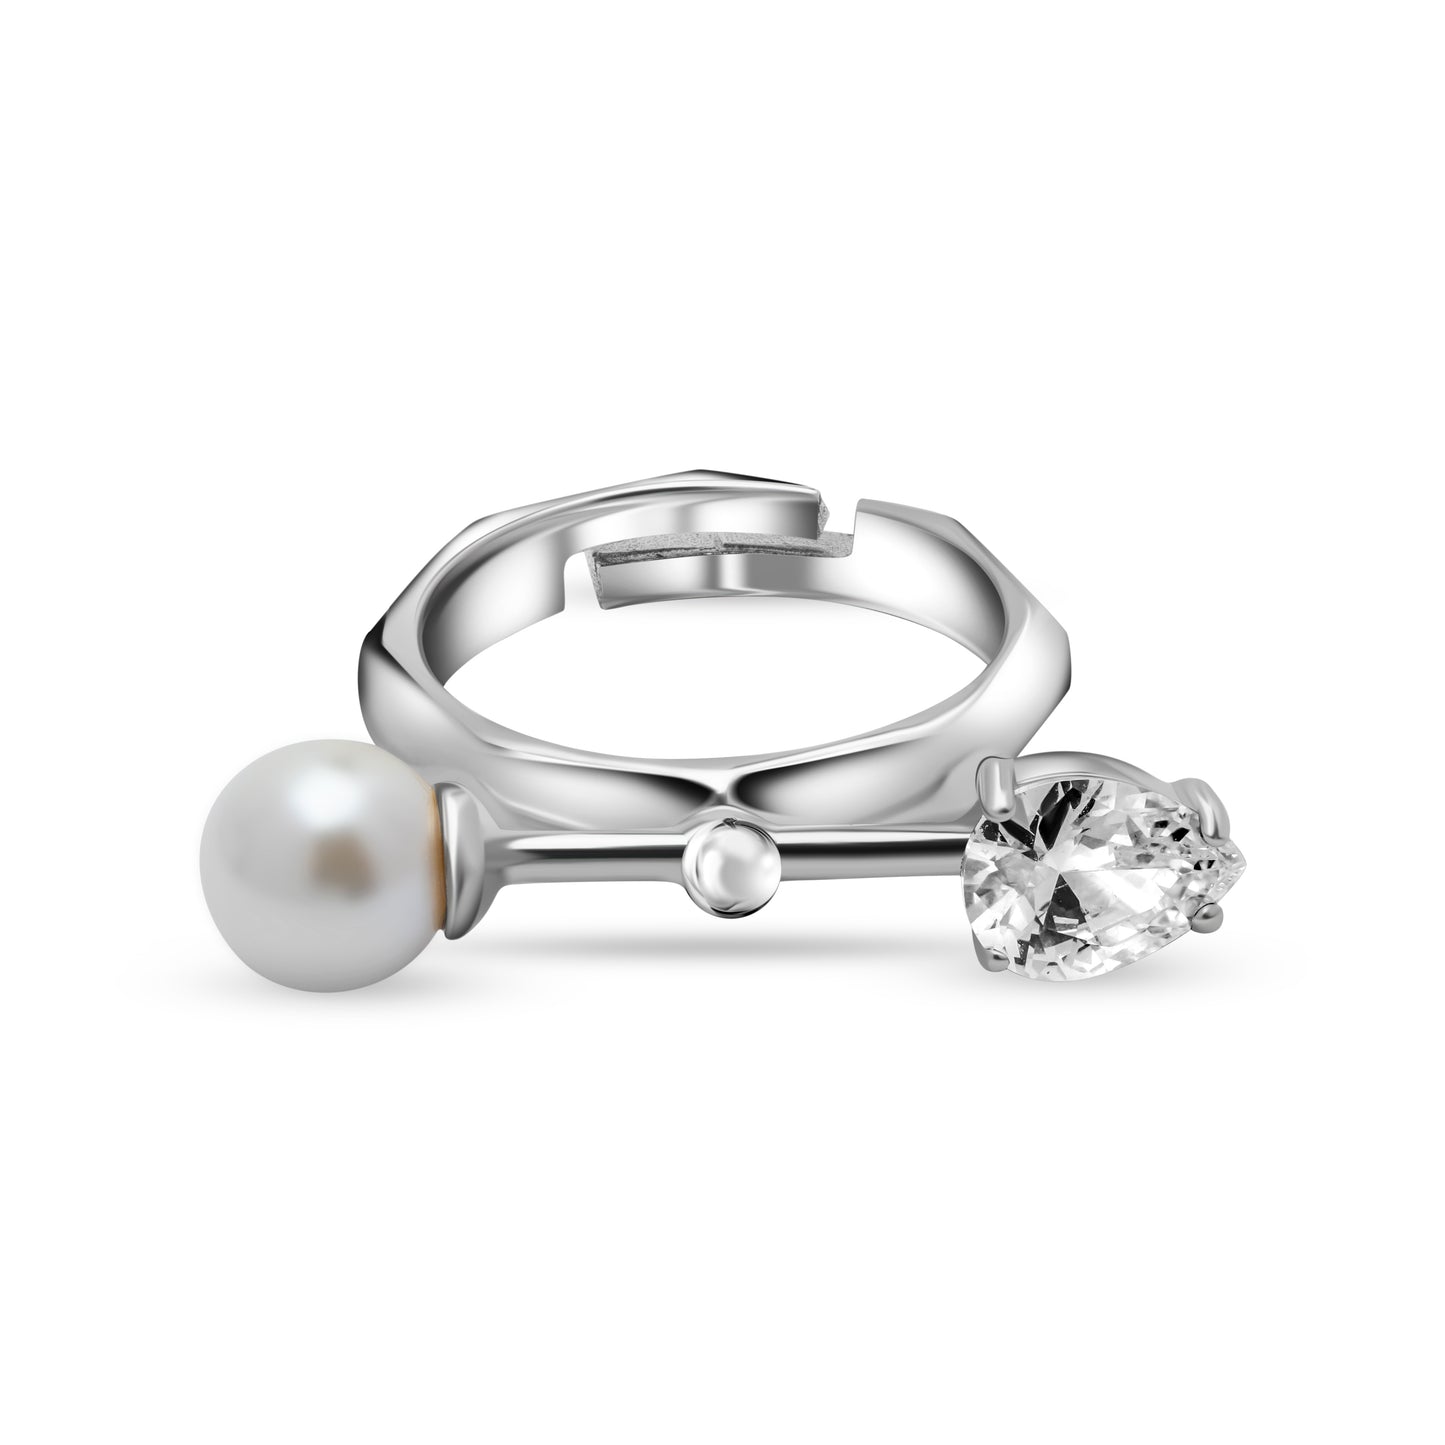 Silver Endearing Ring With a Pearl and Stone